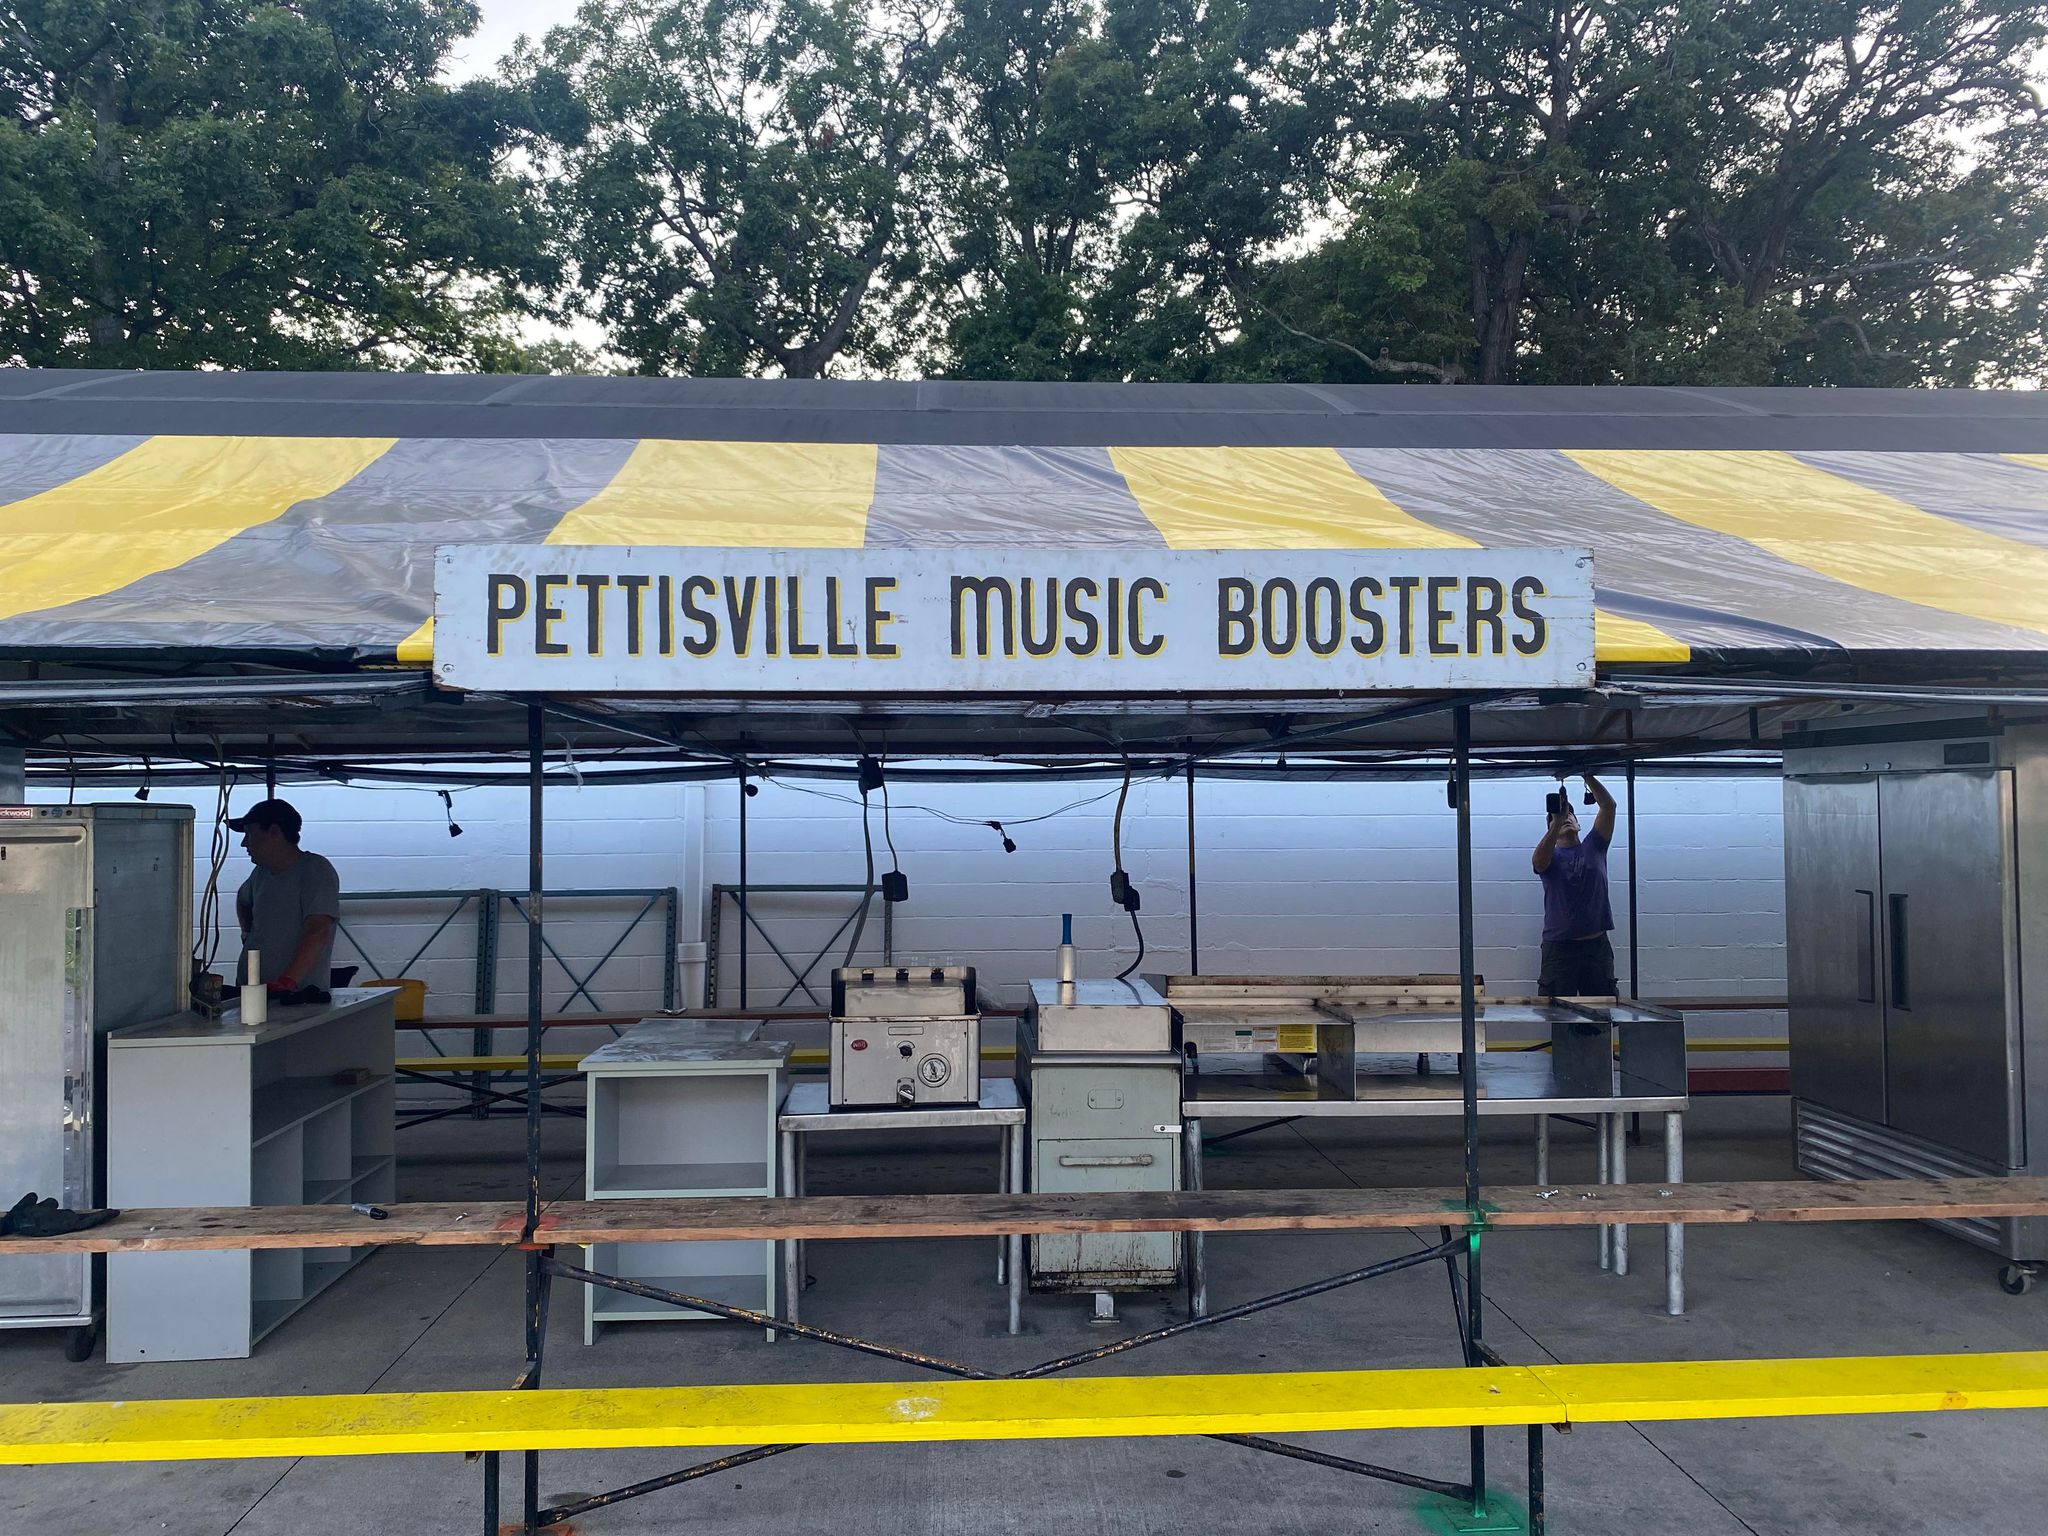 Pettisville Music Boosters